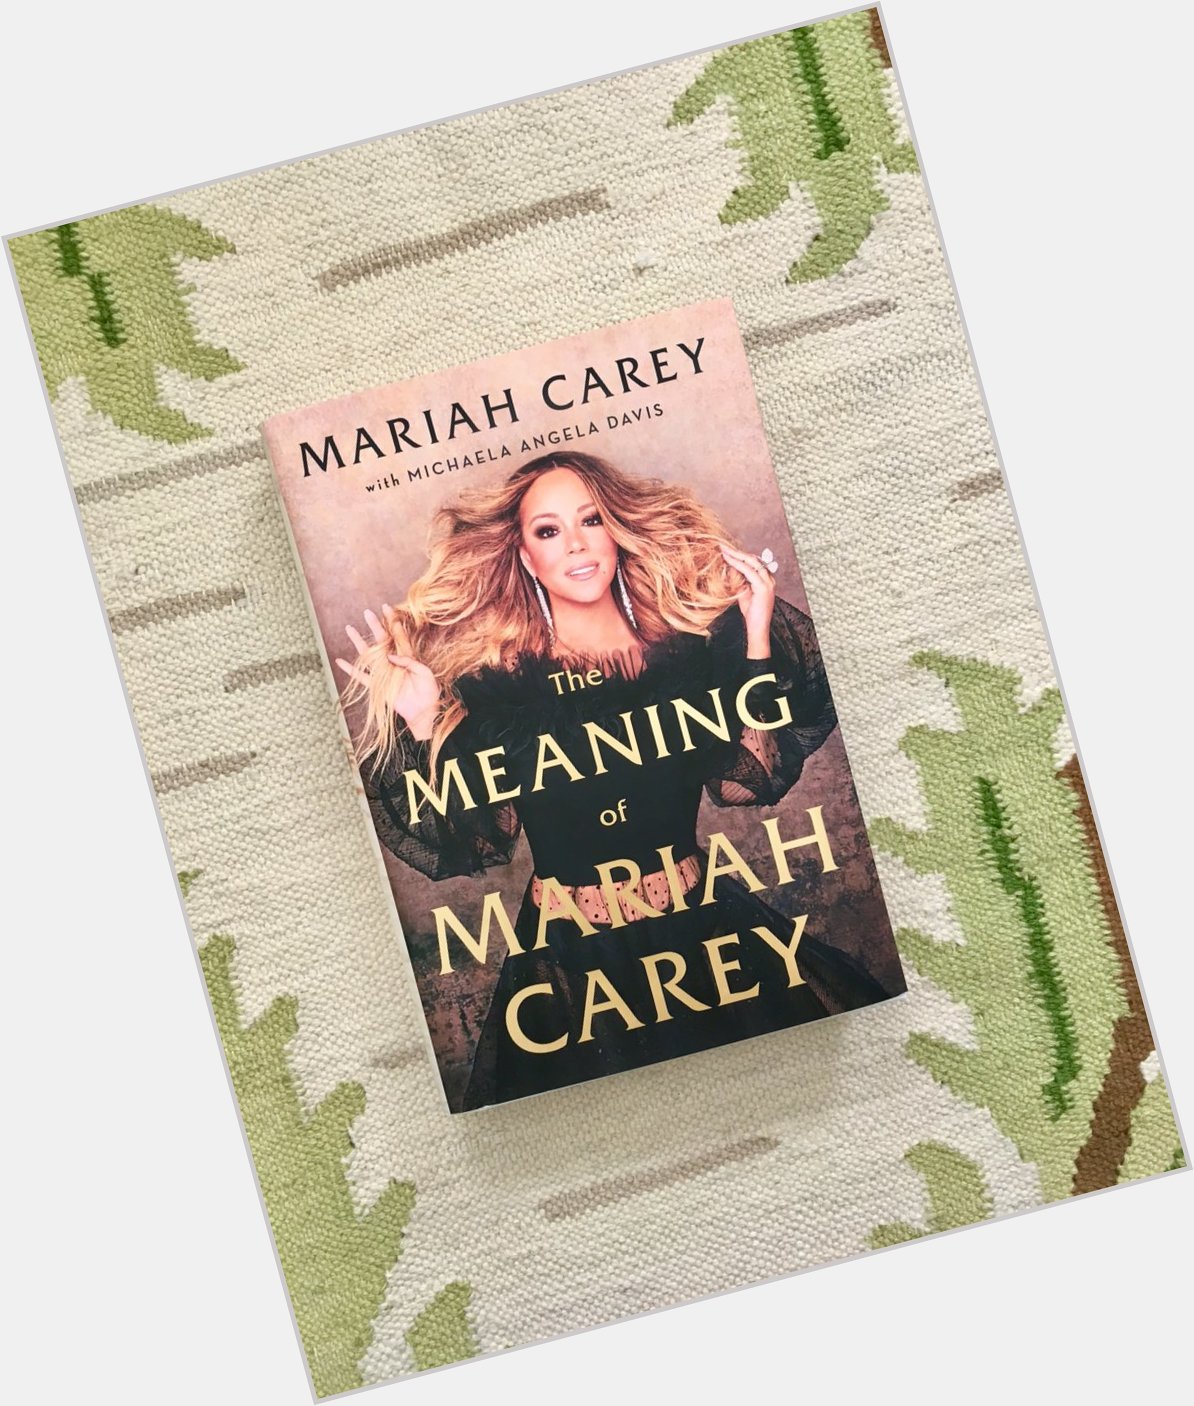 Wishing a happy birthday to our author Mariah Carey!  